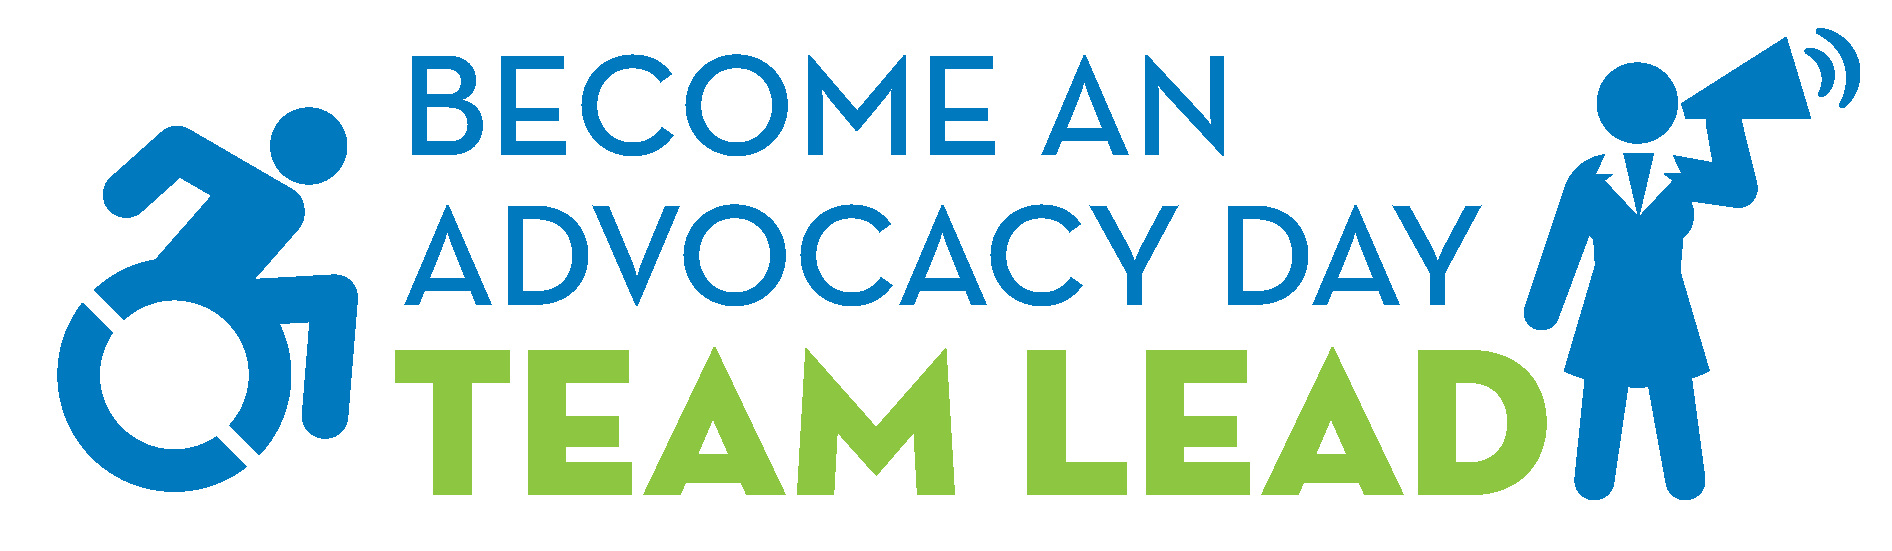 Become an Advocacy Day Team Lead!